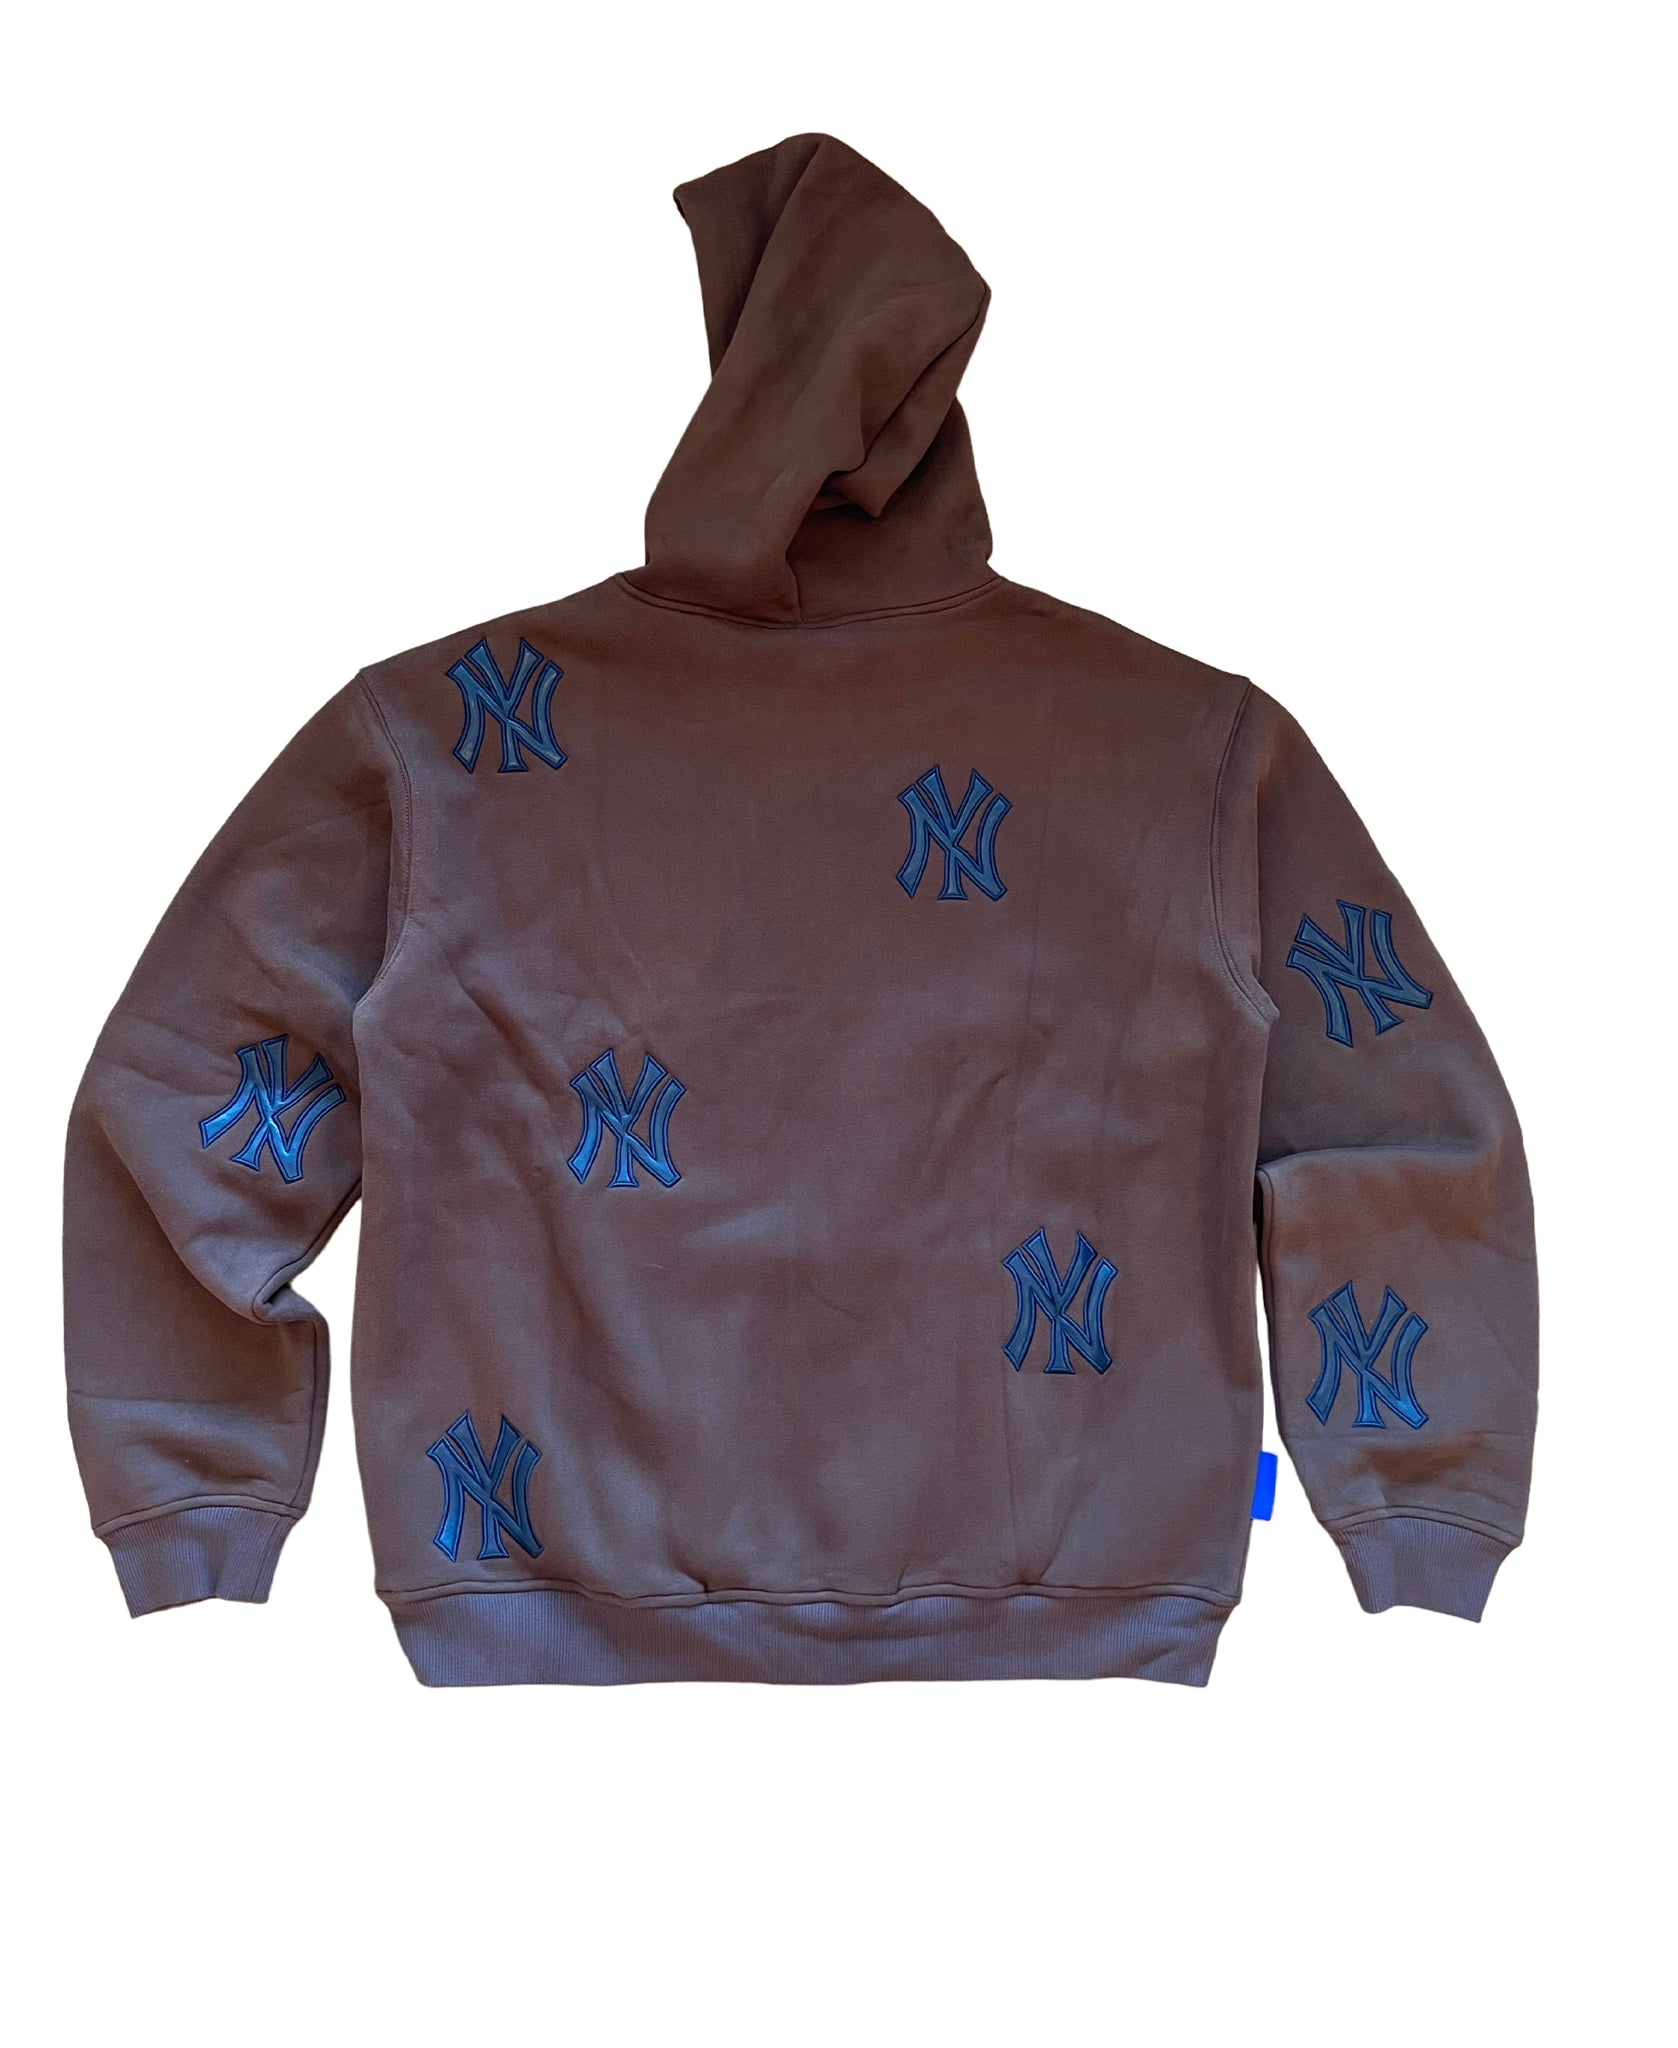 New York Patch Hoodie - Brown